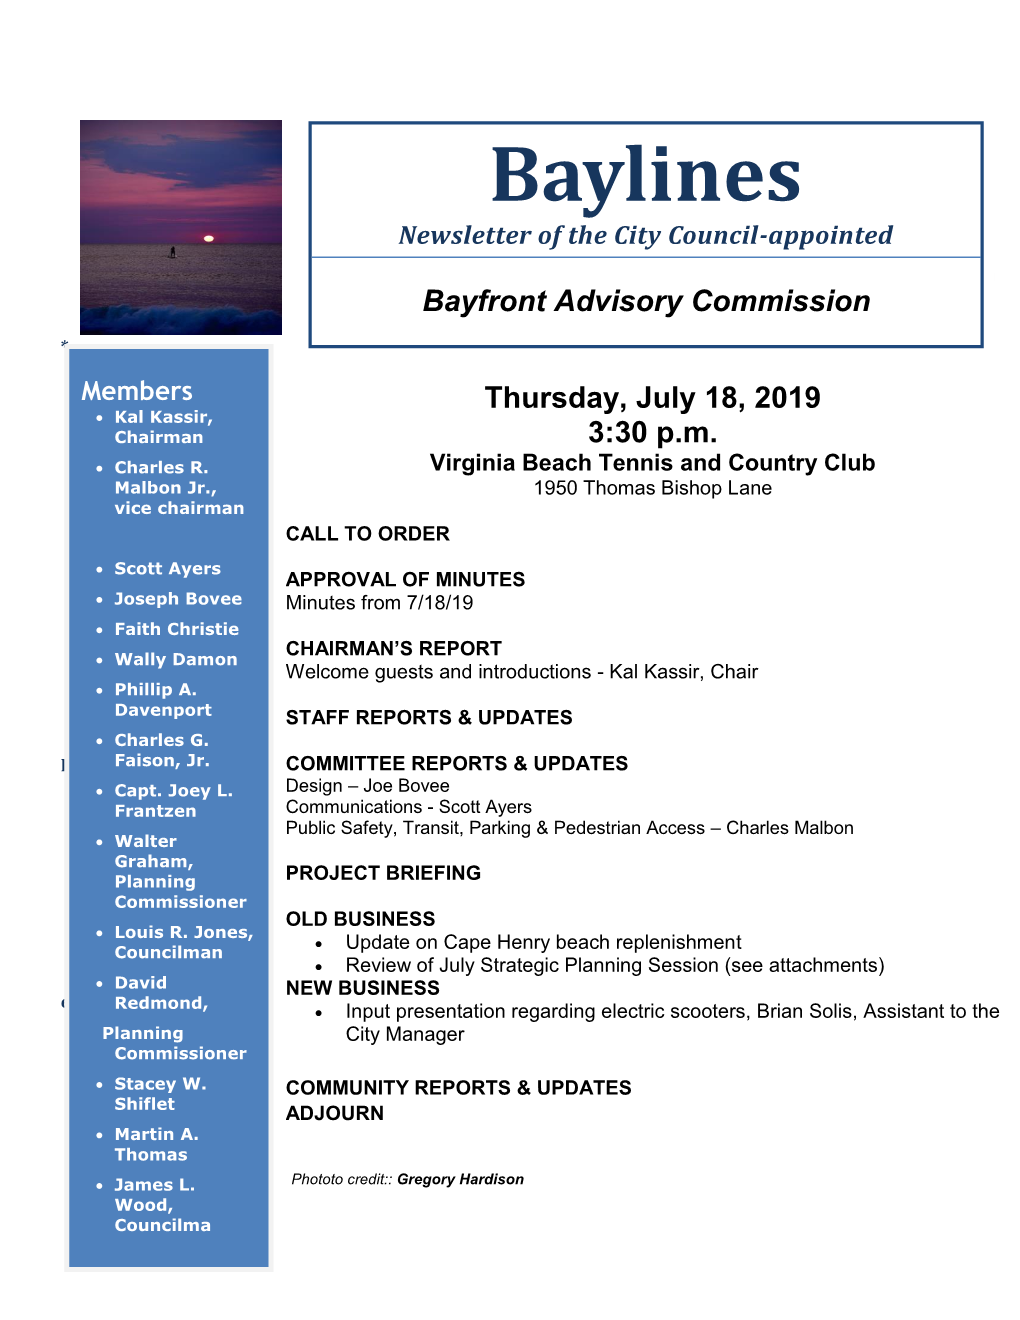 Baylines Newsletter of the City Council-Appointed